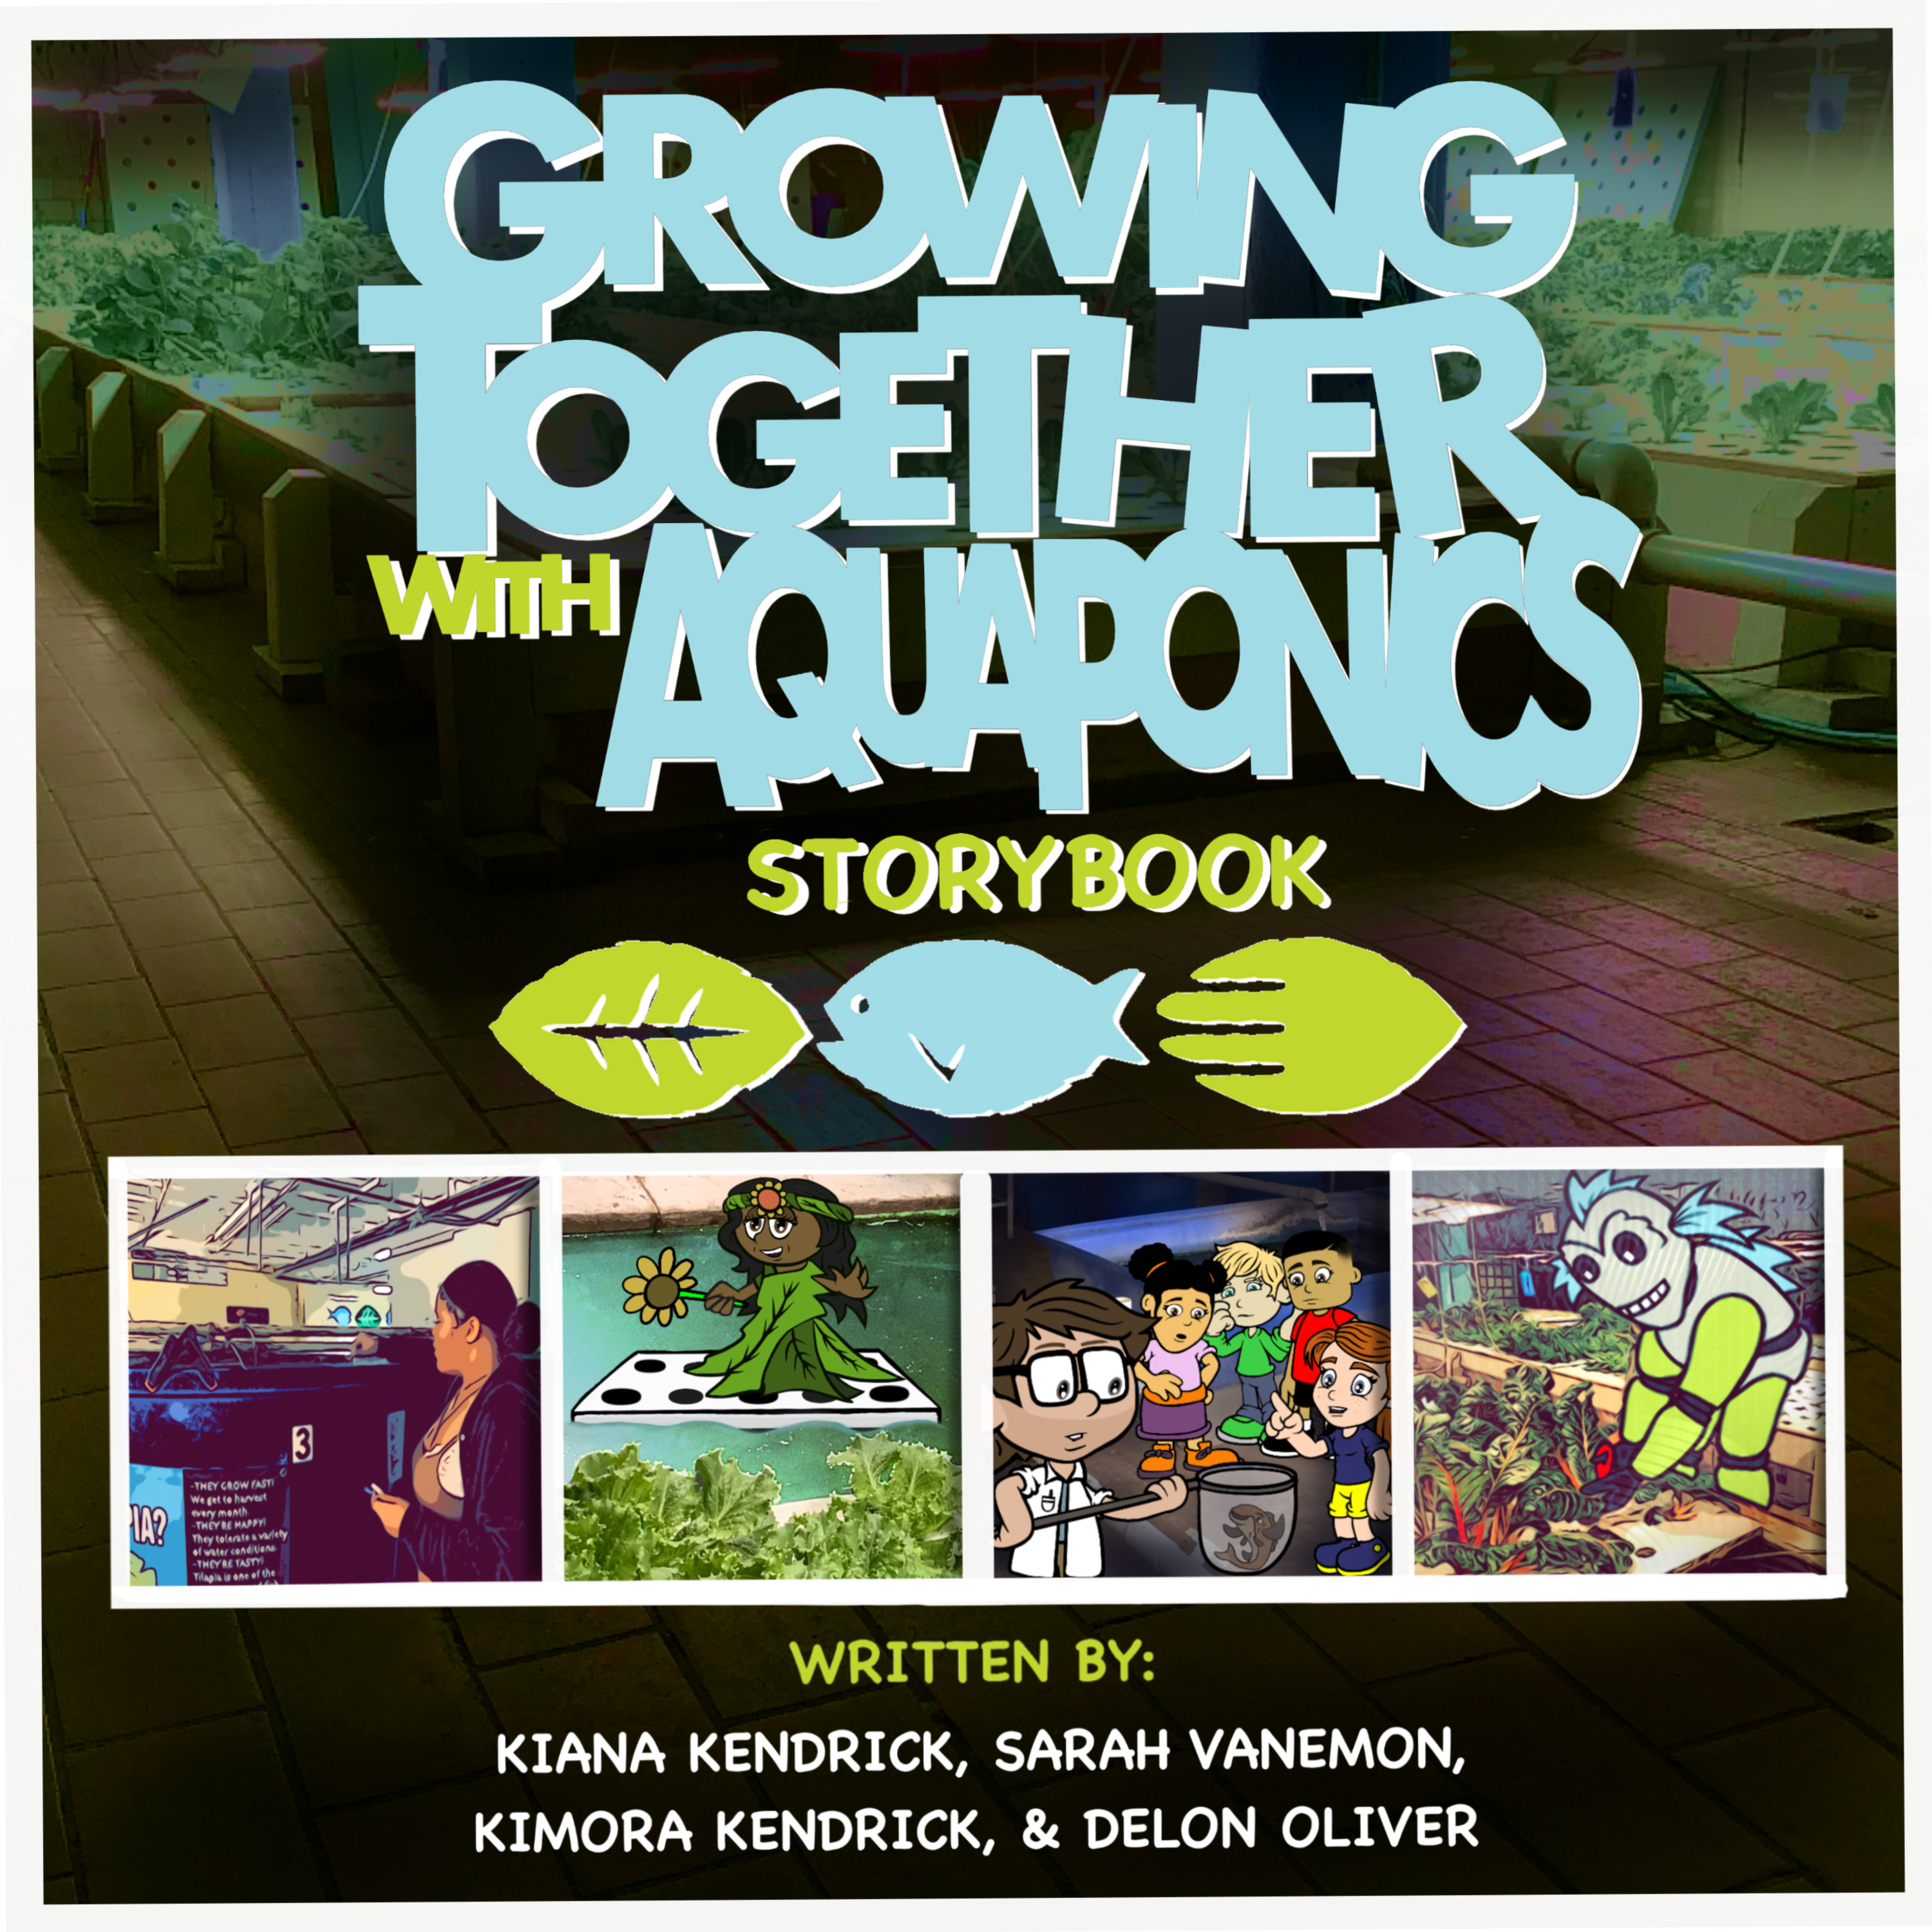 Growing together with Aquaponics!